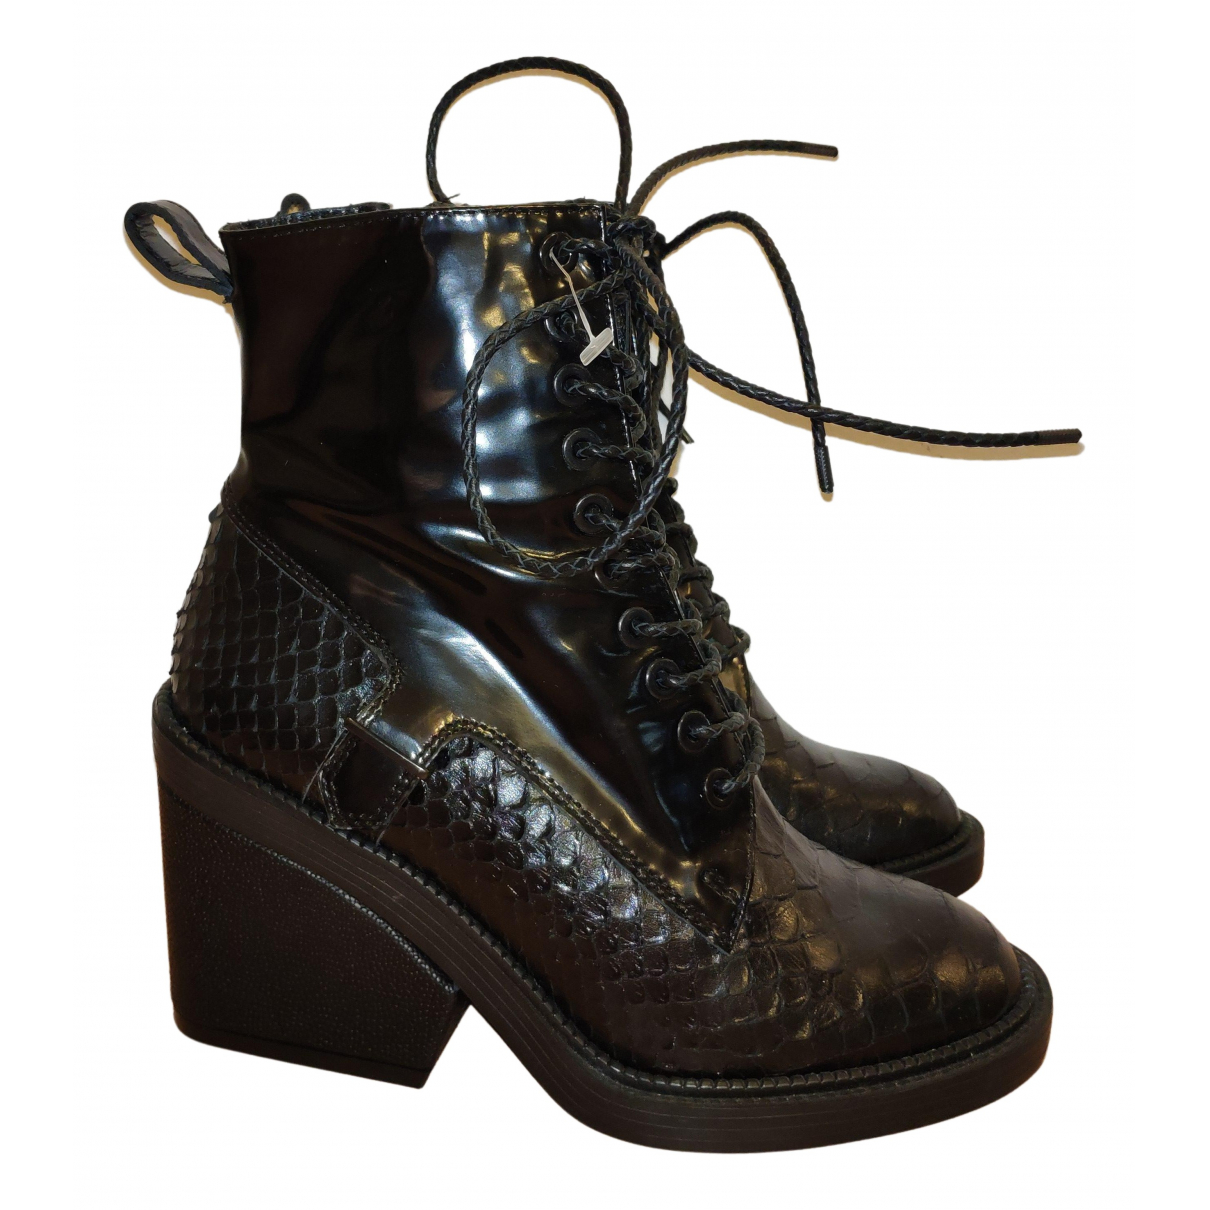 Robert Clergerie Leather Lace Up Boots